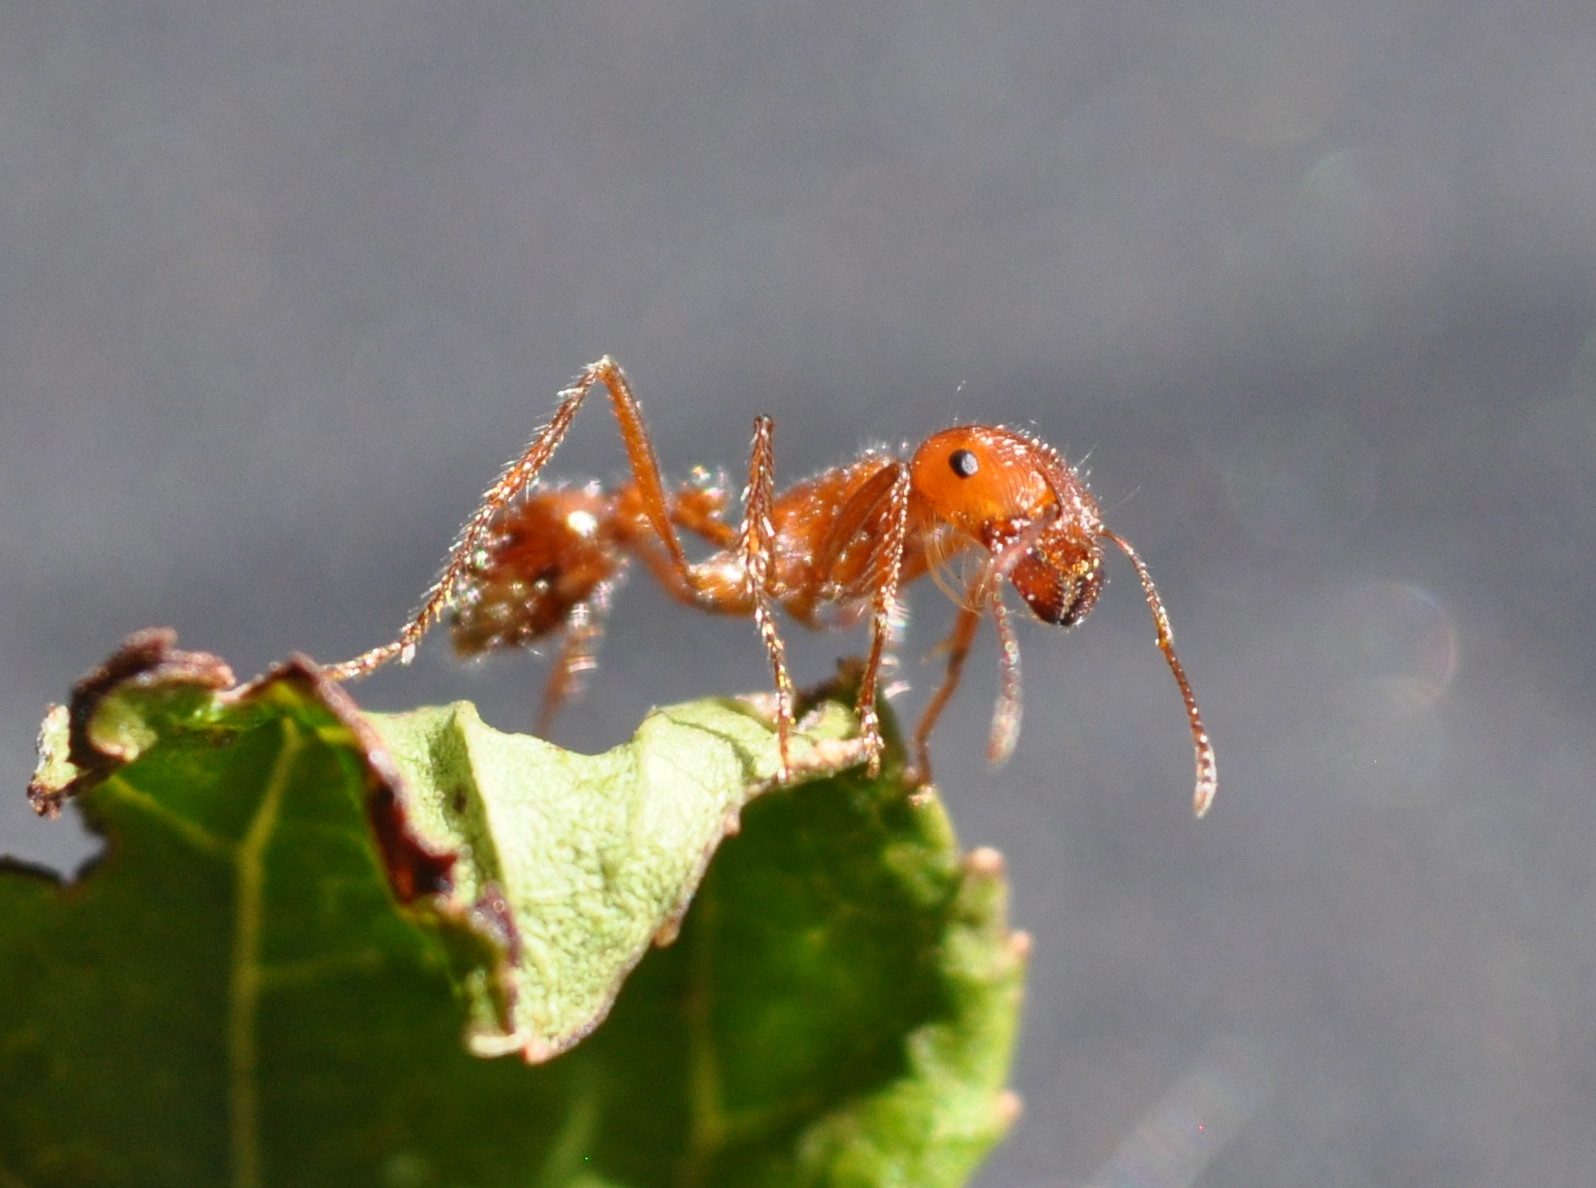 You are currently viewing The Fire Ant Diet: What Do Fire Ants Eat?